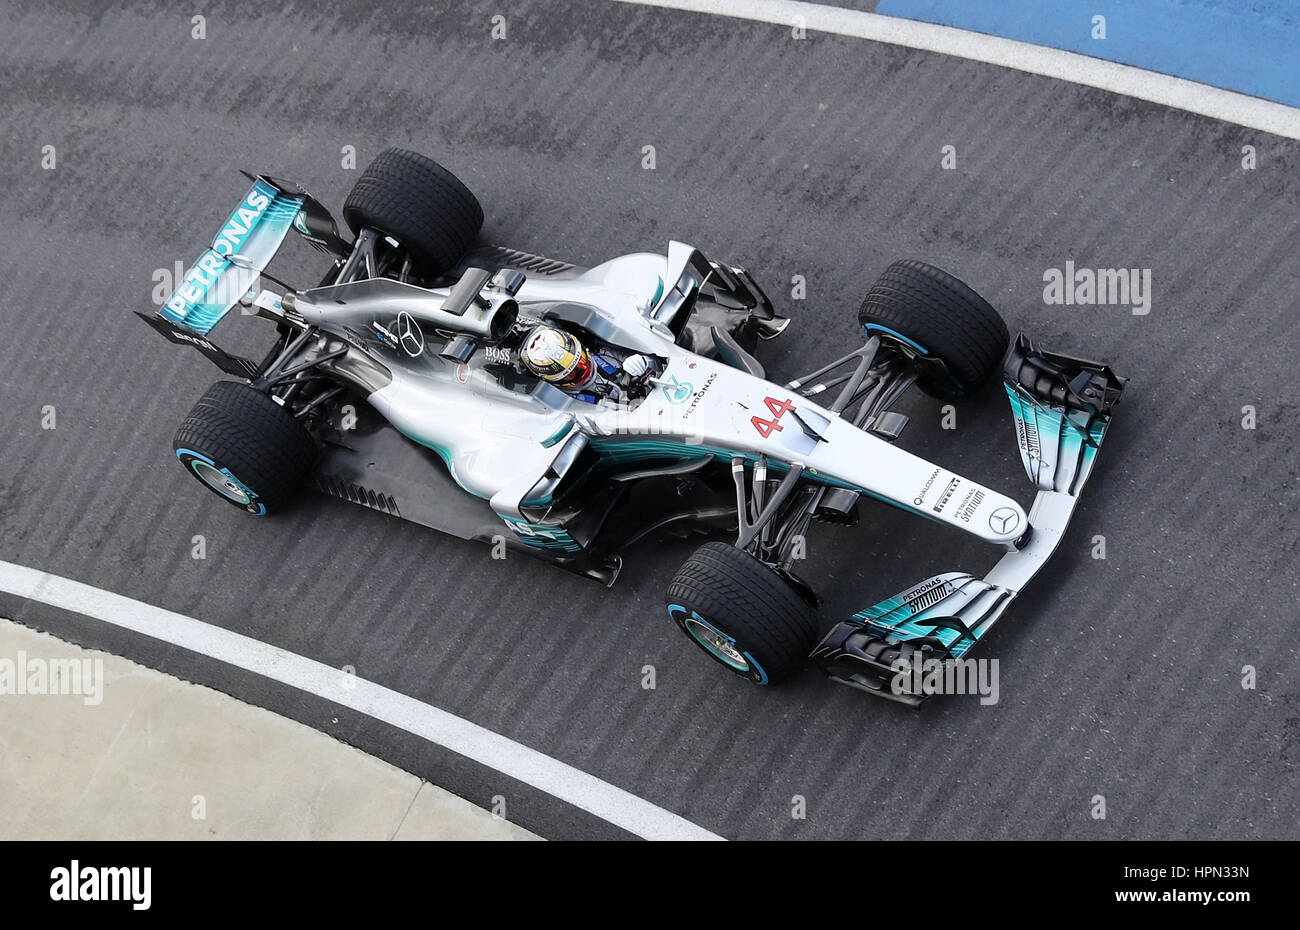 Lewis Hamilton in the new Mercedes W08 Formula One car during the Mercedes-AMG 2017 Car Launch at Silverstone, Towcester. Stock Photo